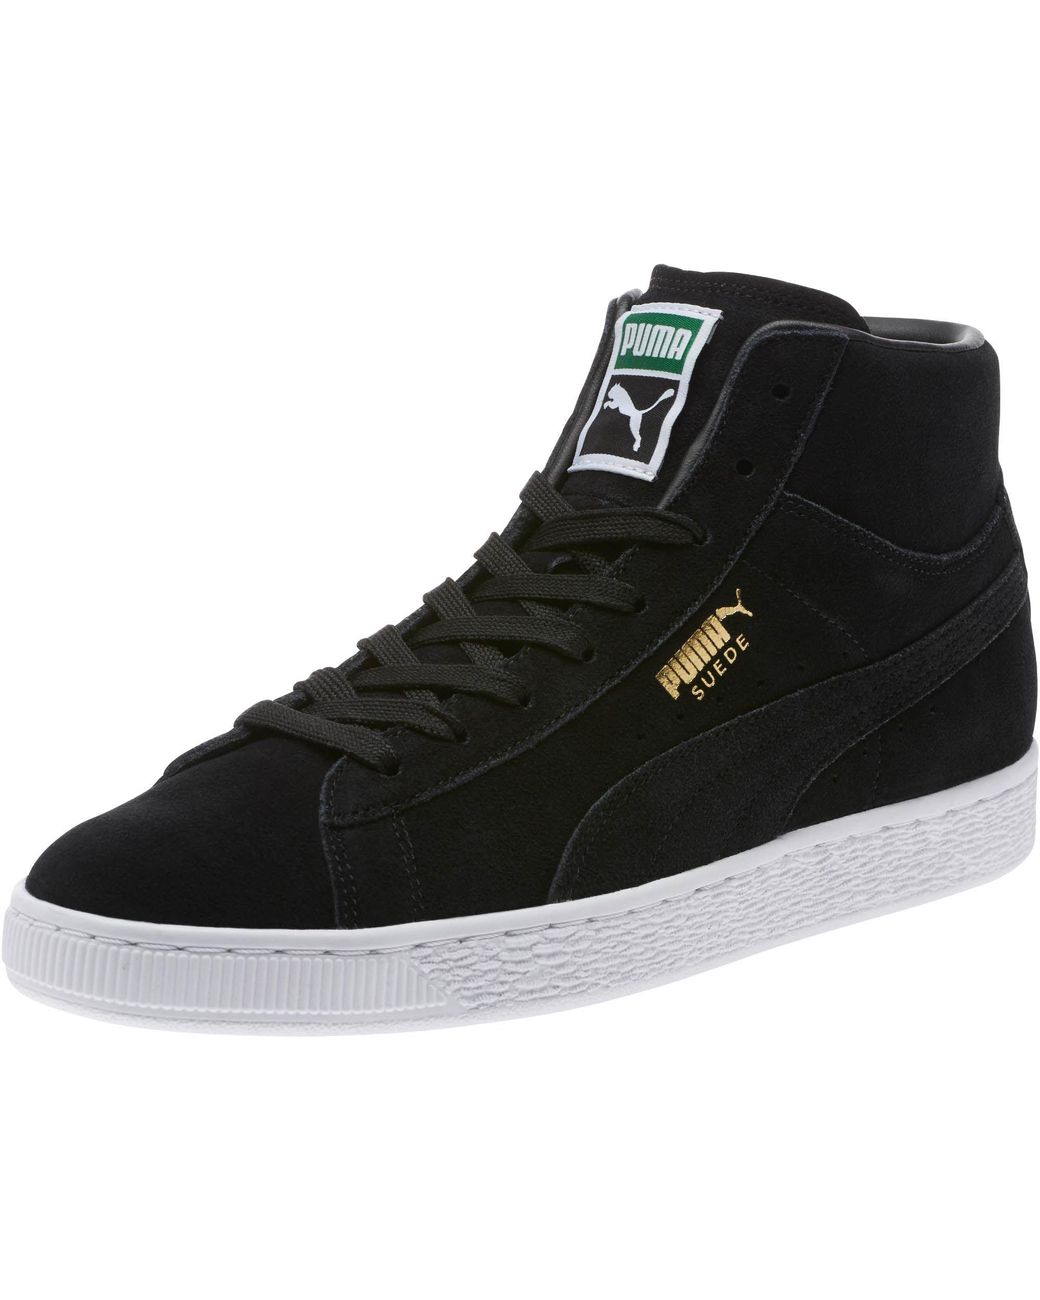 Puma Suede Classic Mid Sneakers In Black For Men Lyst